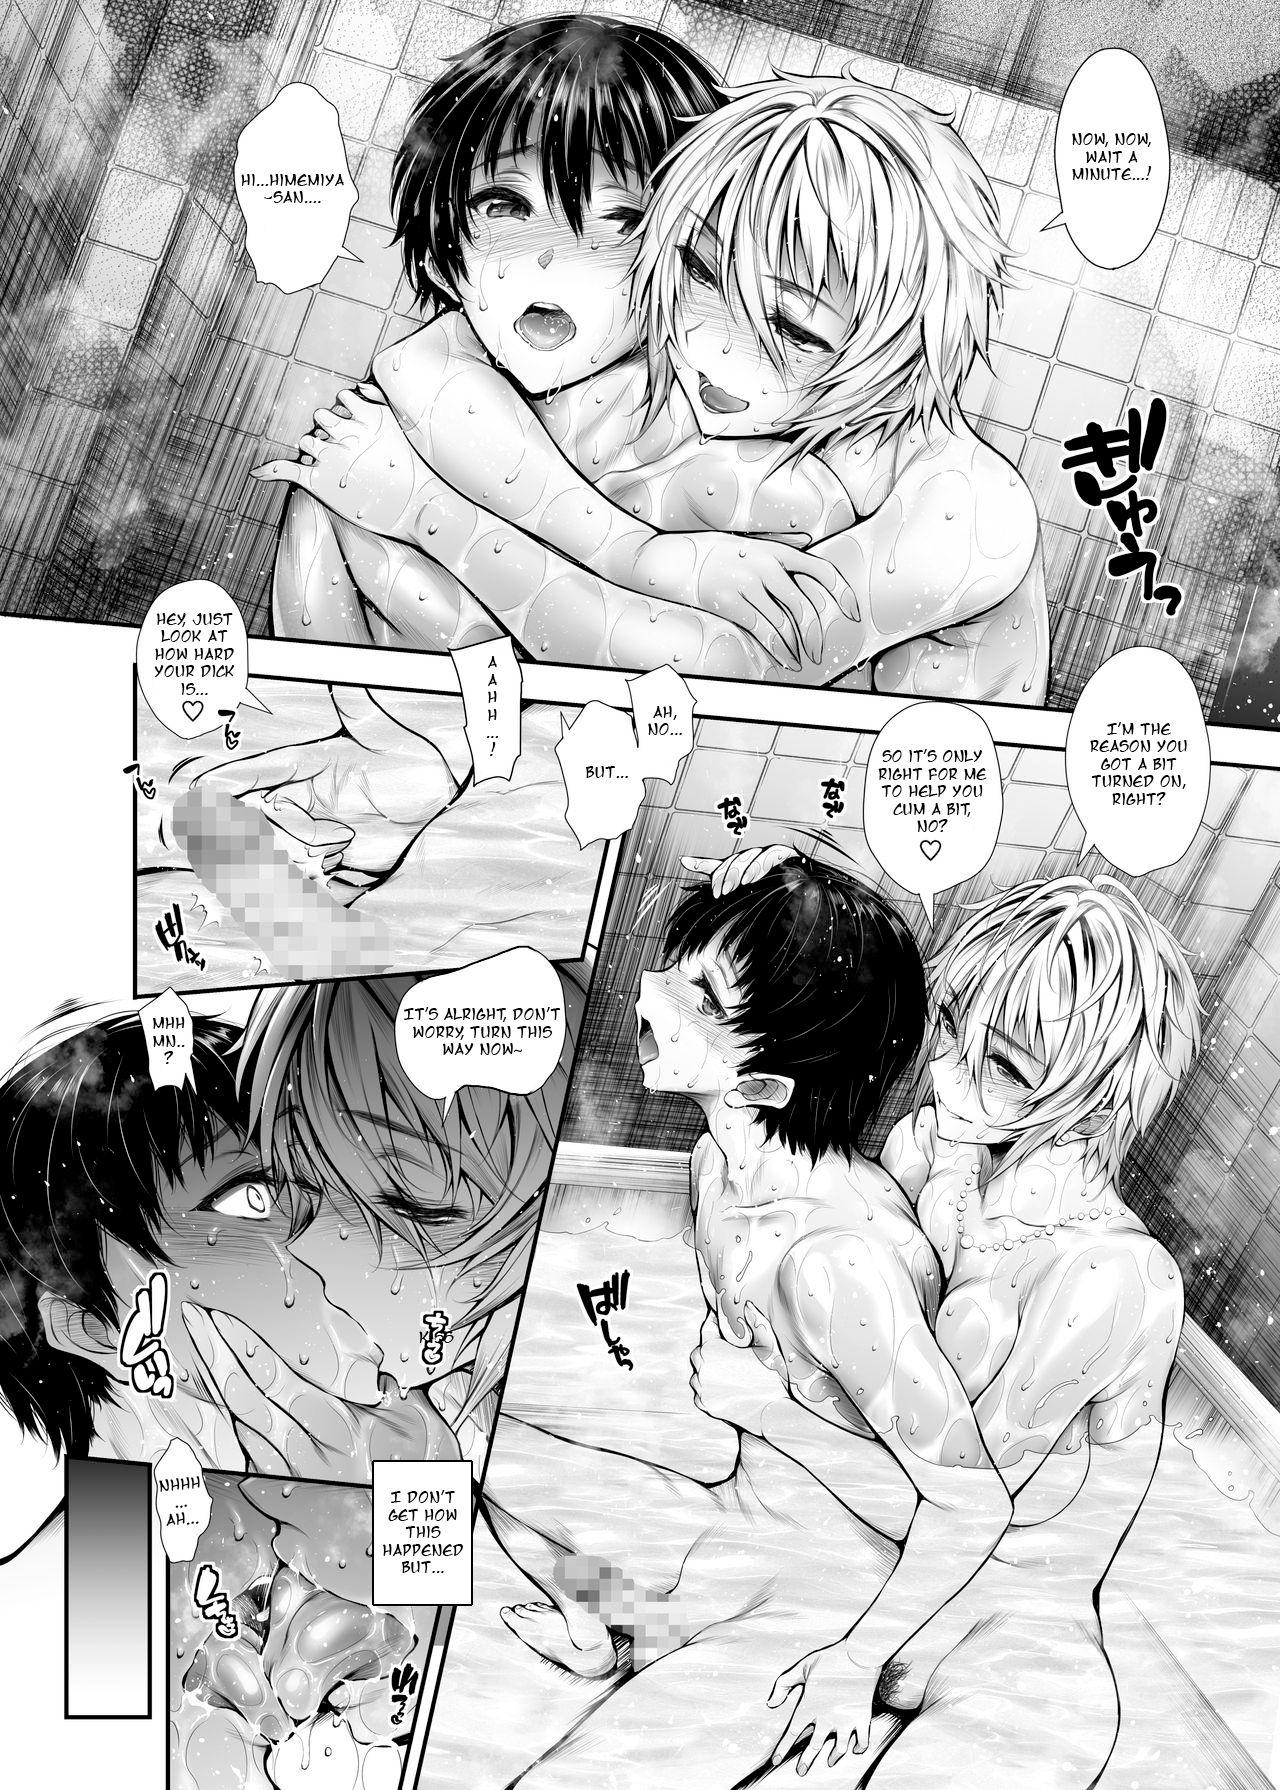 Soft Share House no Seikatsu Rule | Sexual Rules in a Shared House - Original Exposed - Page 5